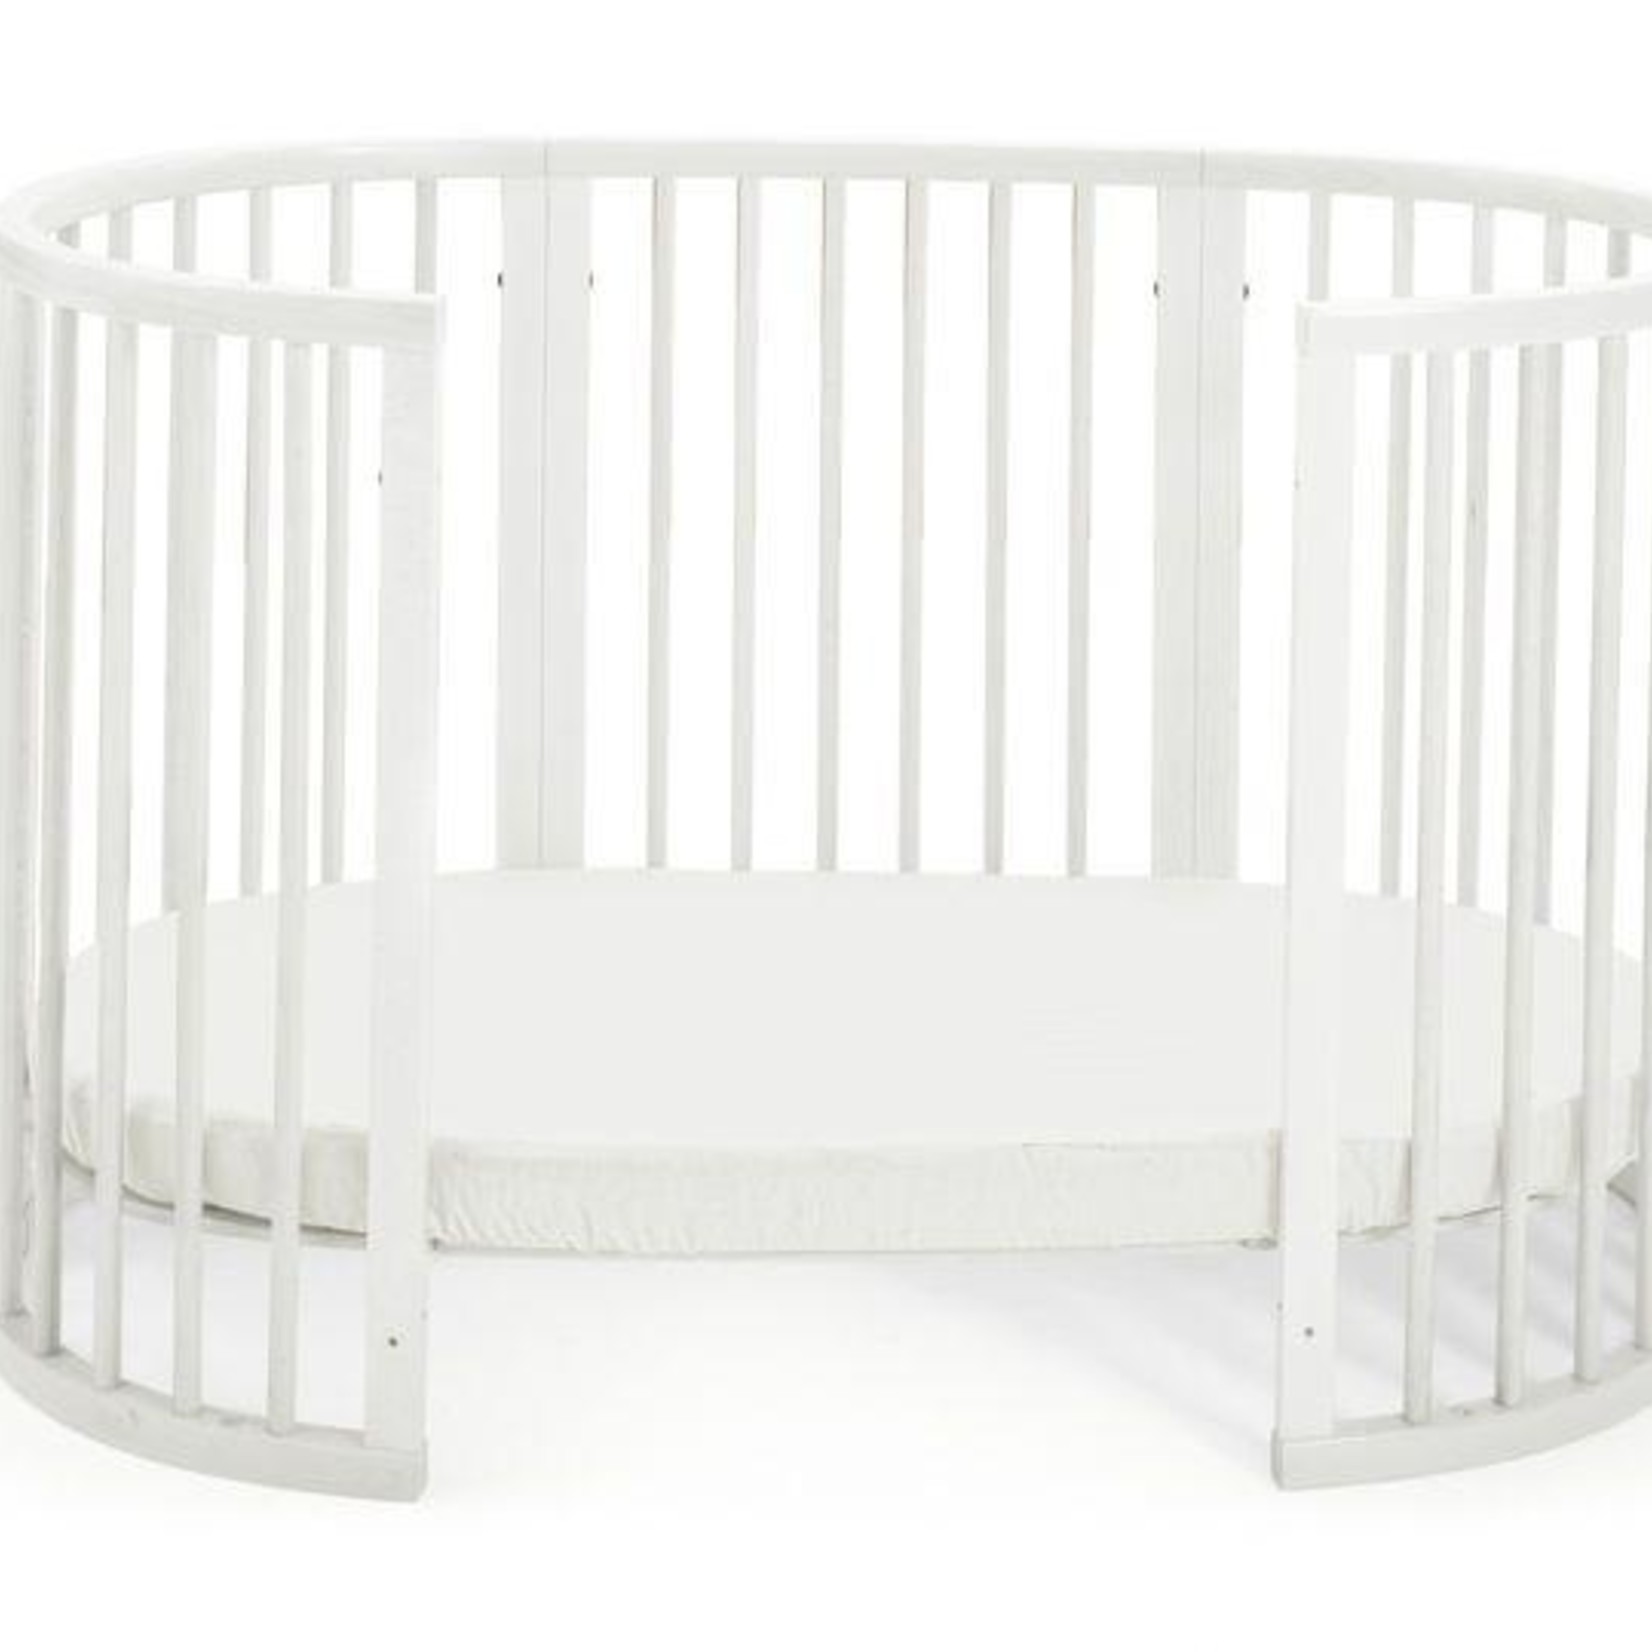 Living Textiles 2-PACK JERSEY ROUND COT SHEET-White